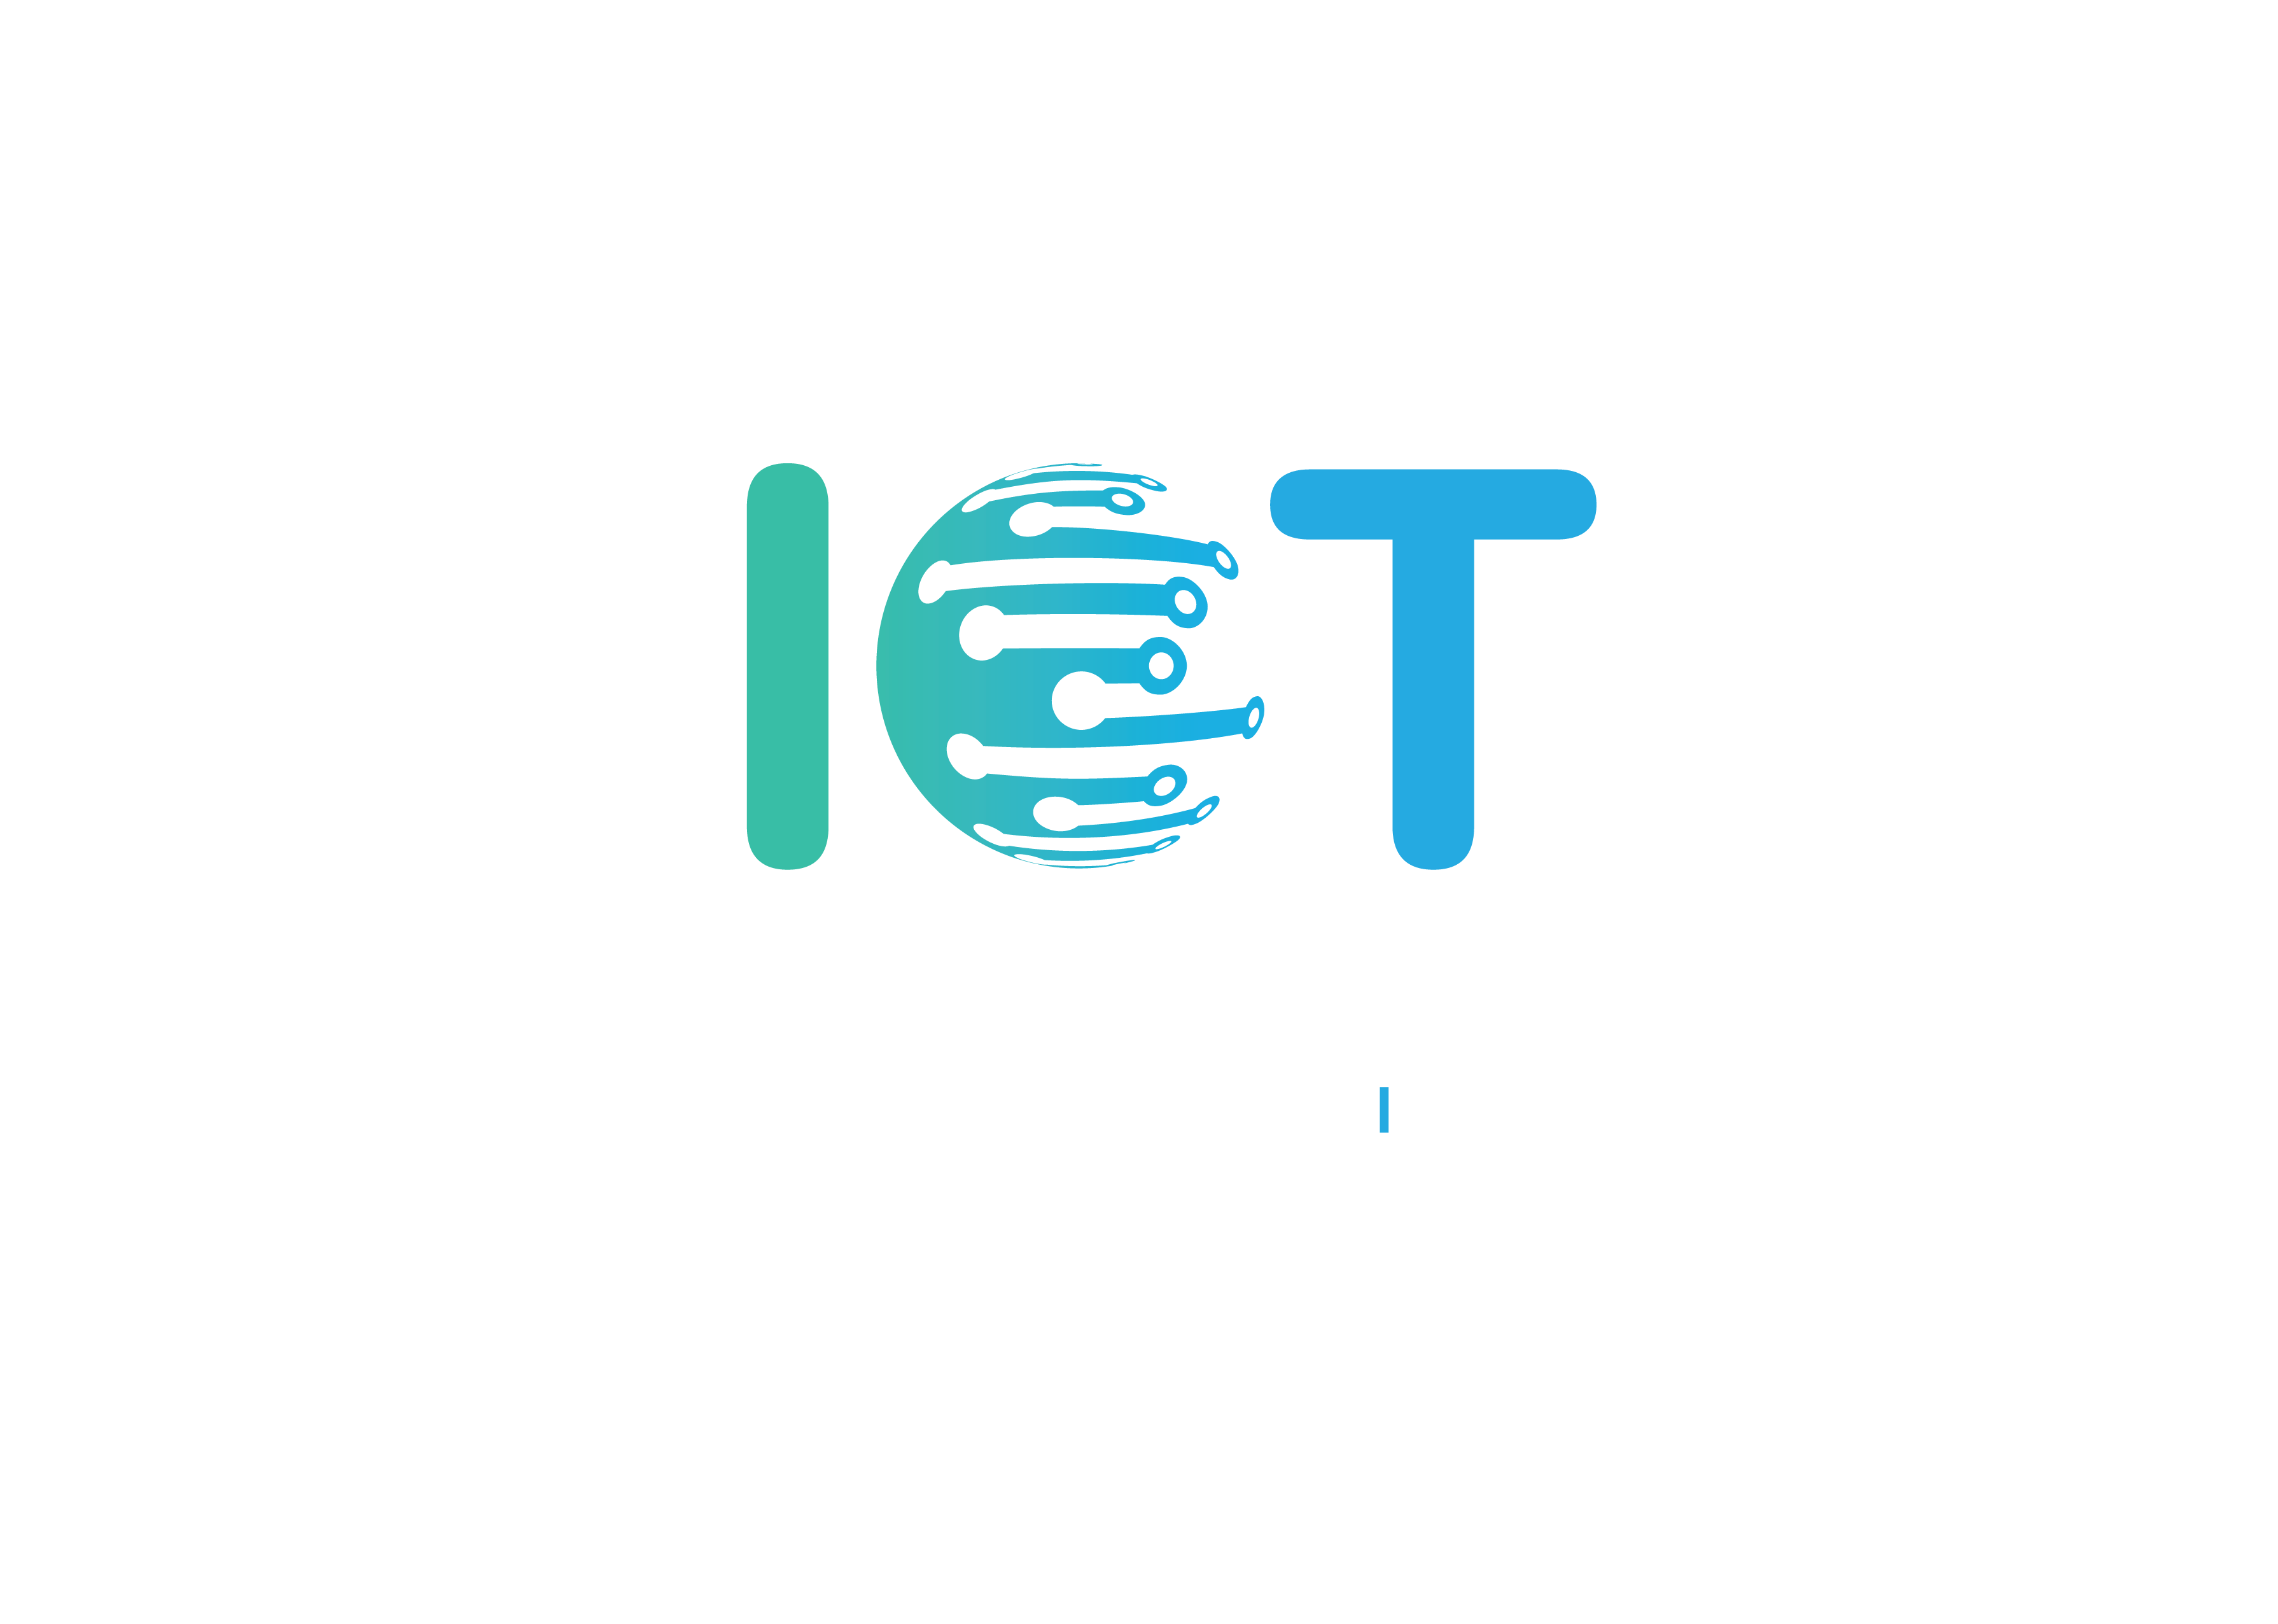 UMS IoT Integration Summit 2017 Dubai will be an exclusive two-day thought leadership forum to explore the impact of IoT